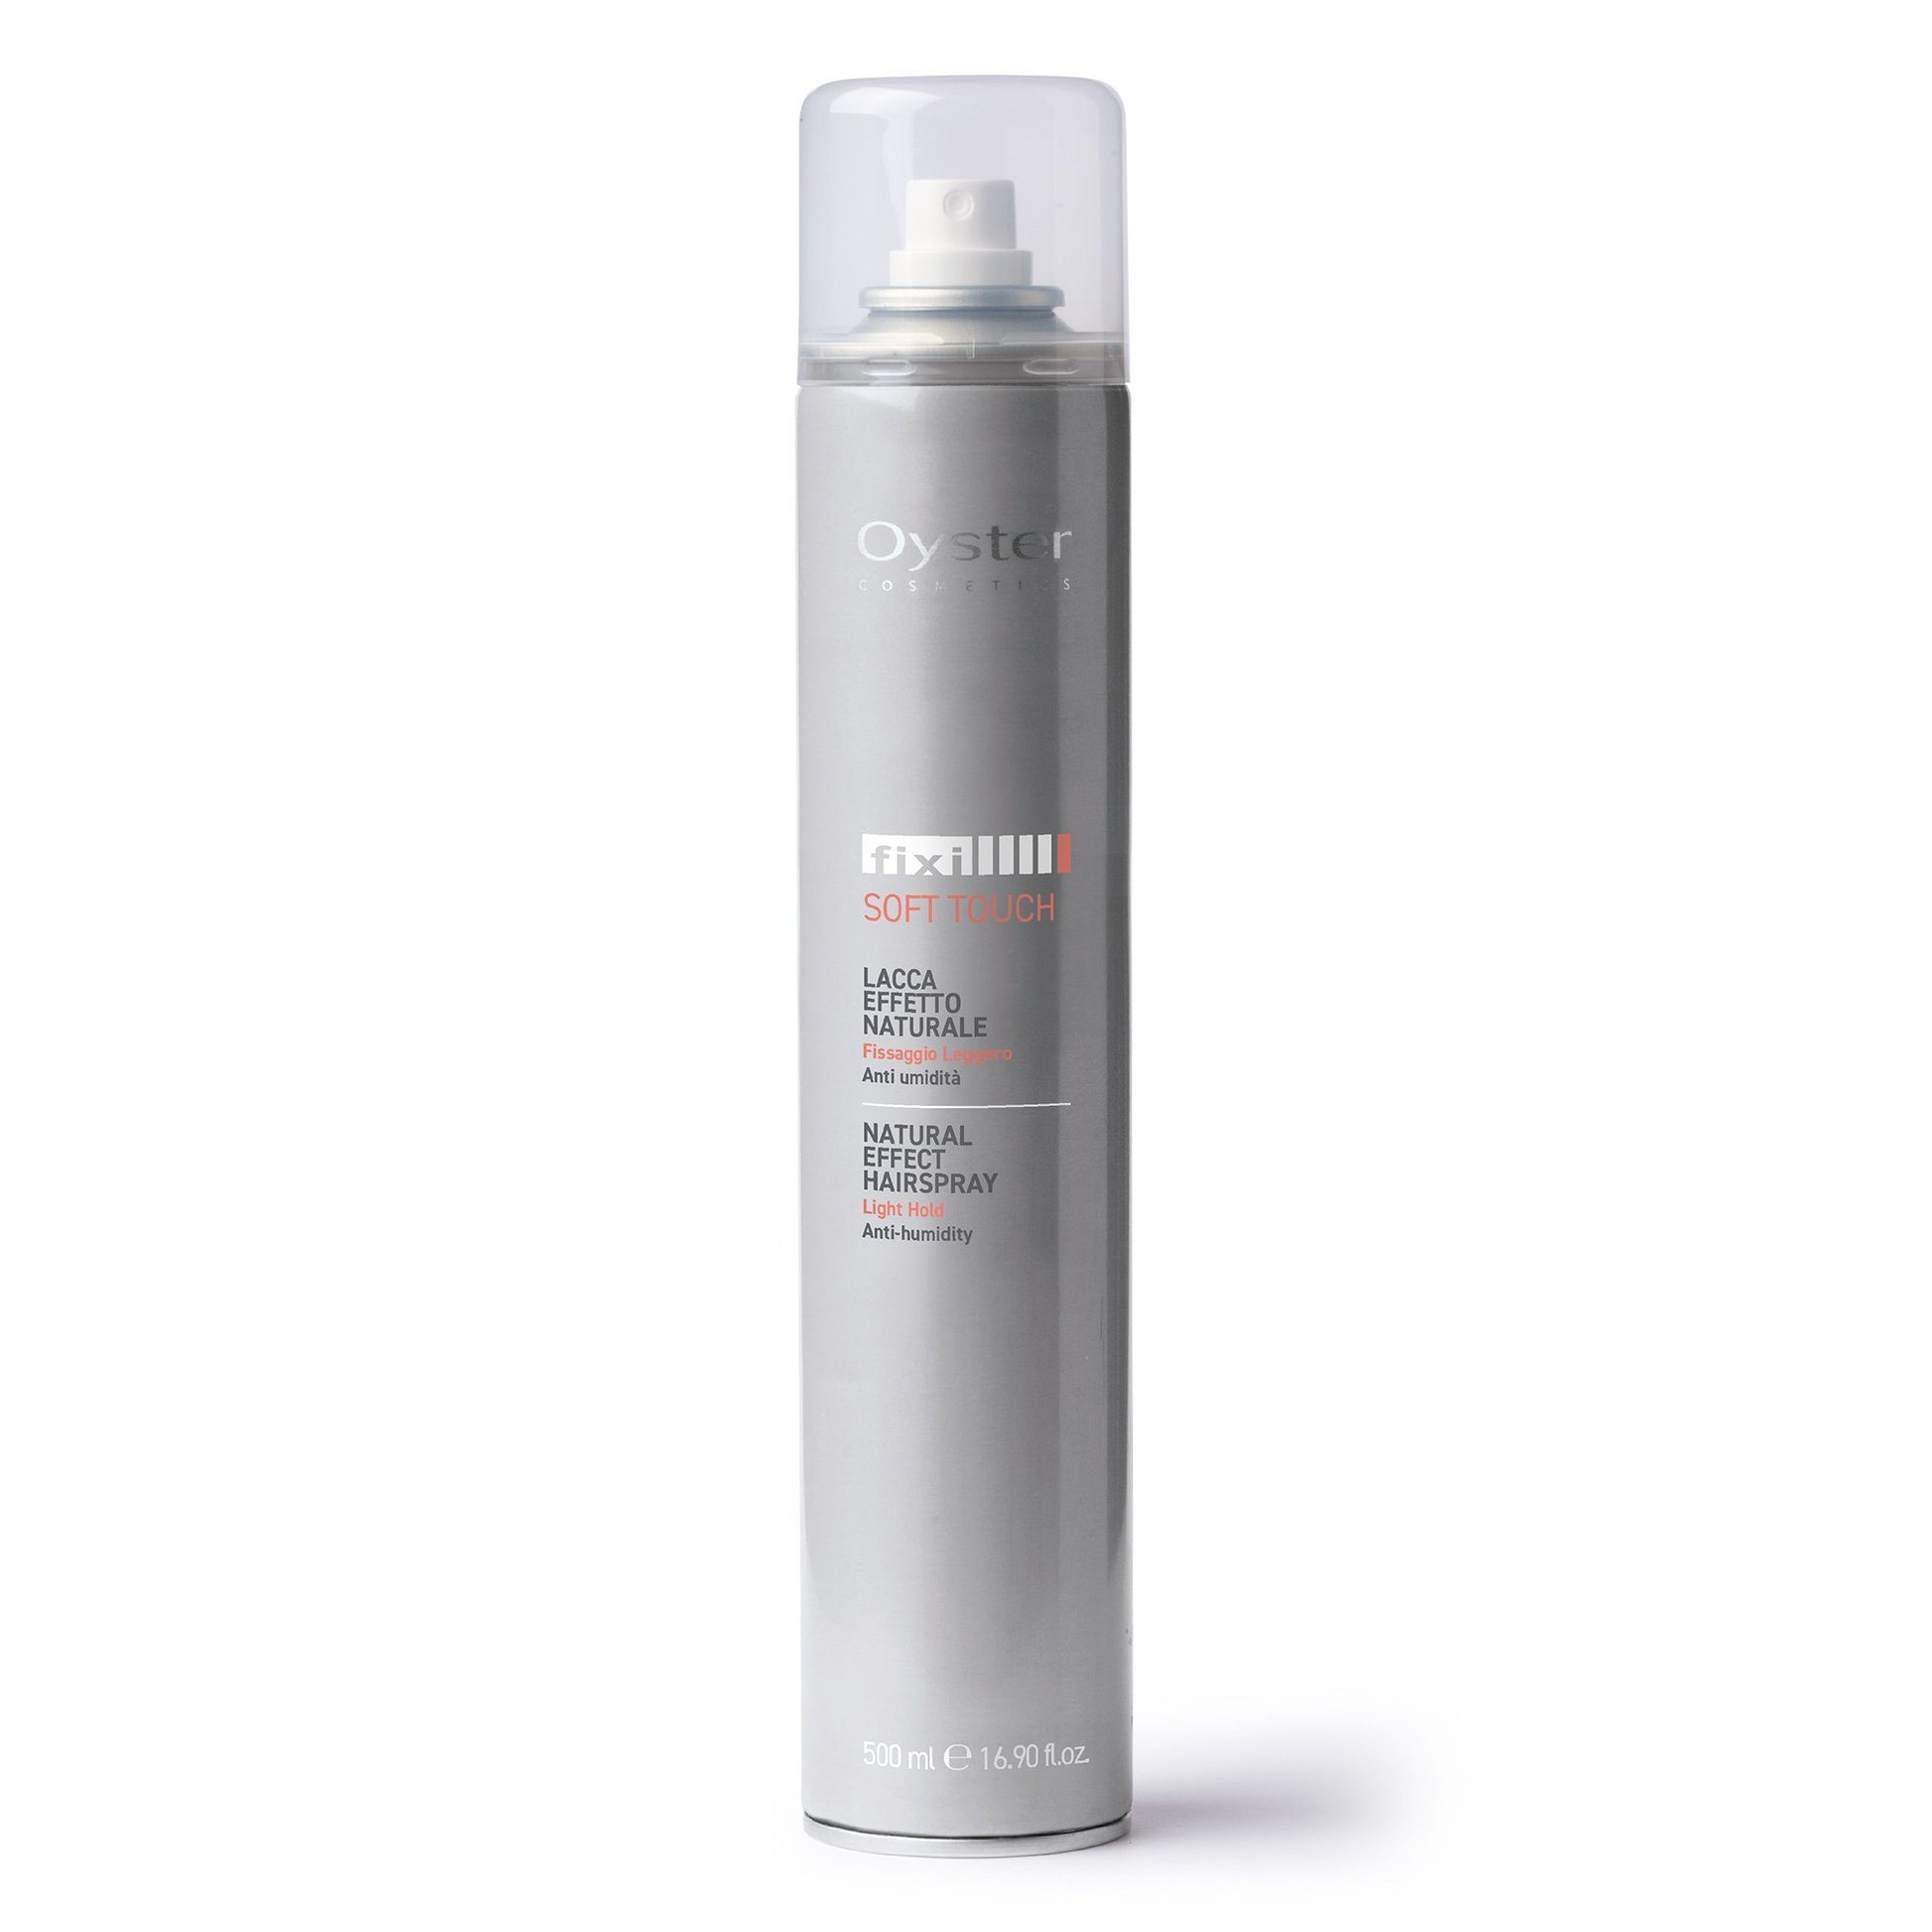 Hairspray Soft Touch | FIXI HAIR STYLING PRODUCTS OYSTER 